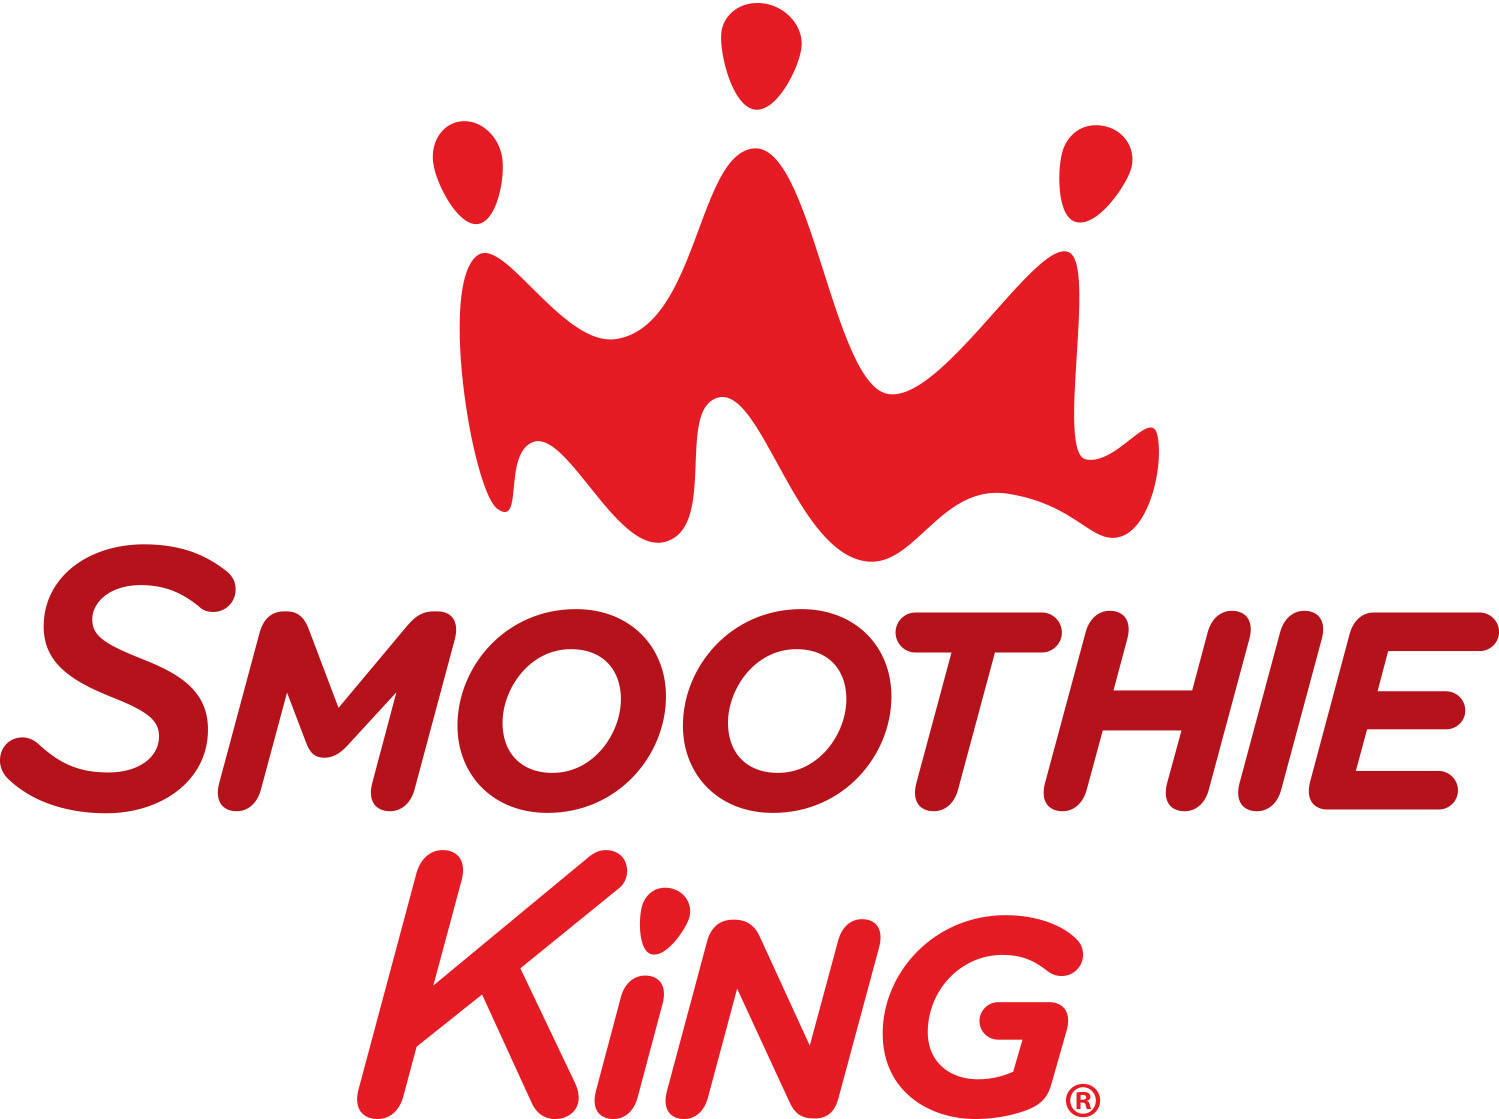 Smoothie King Announces Shift To Cleaner Blending